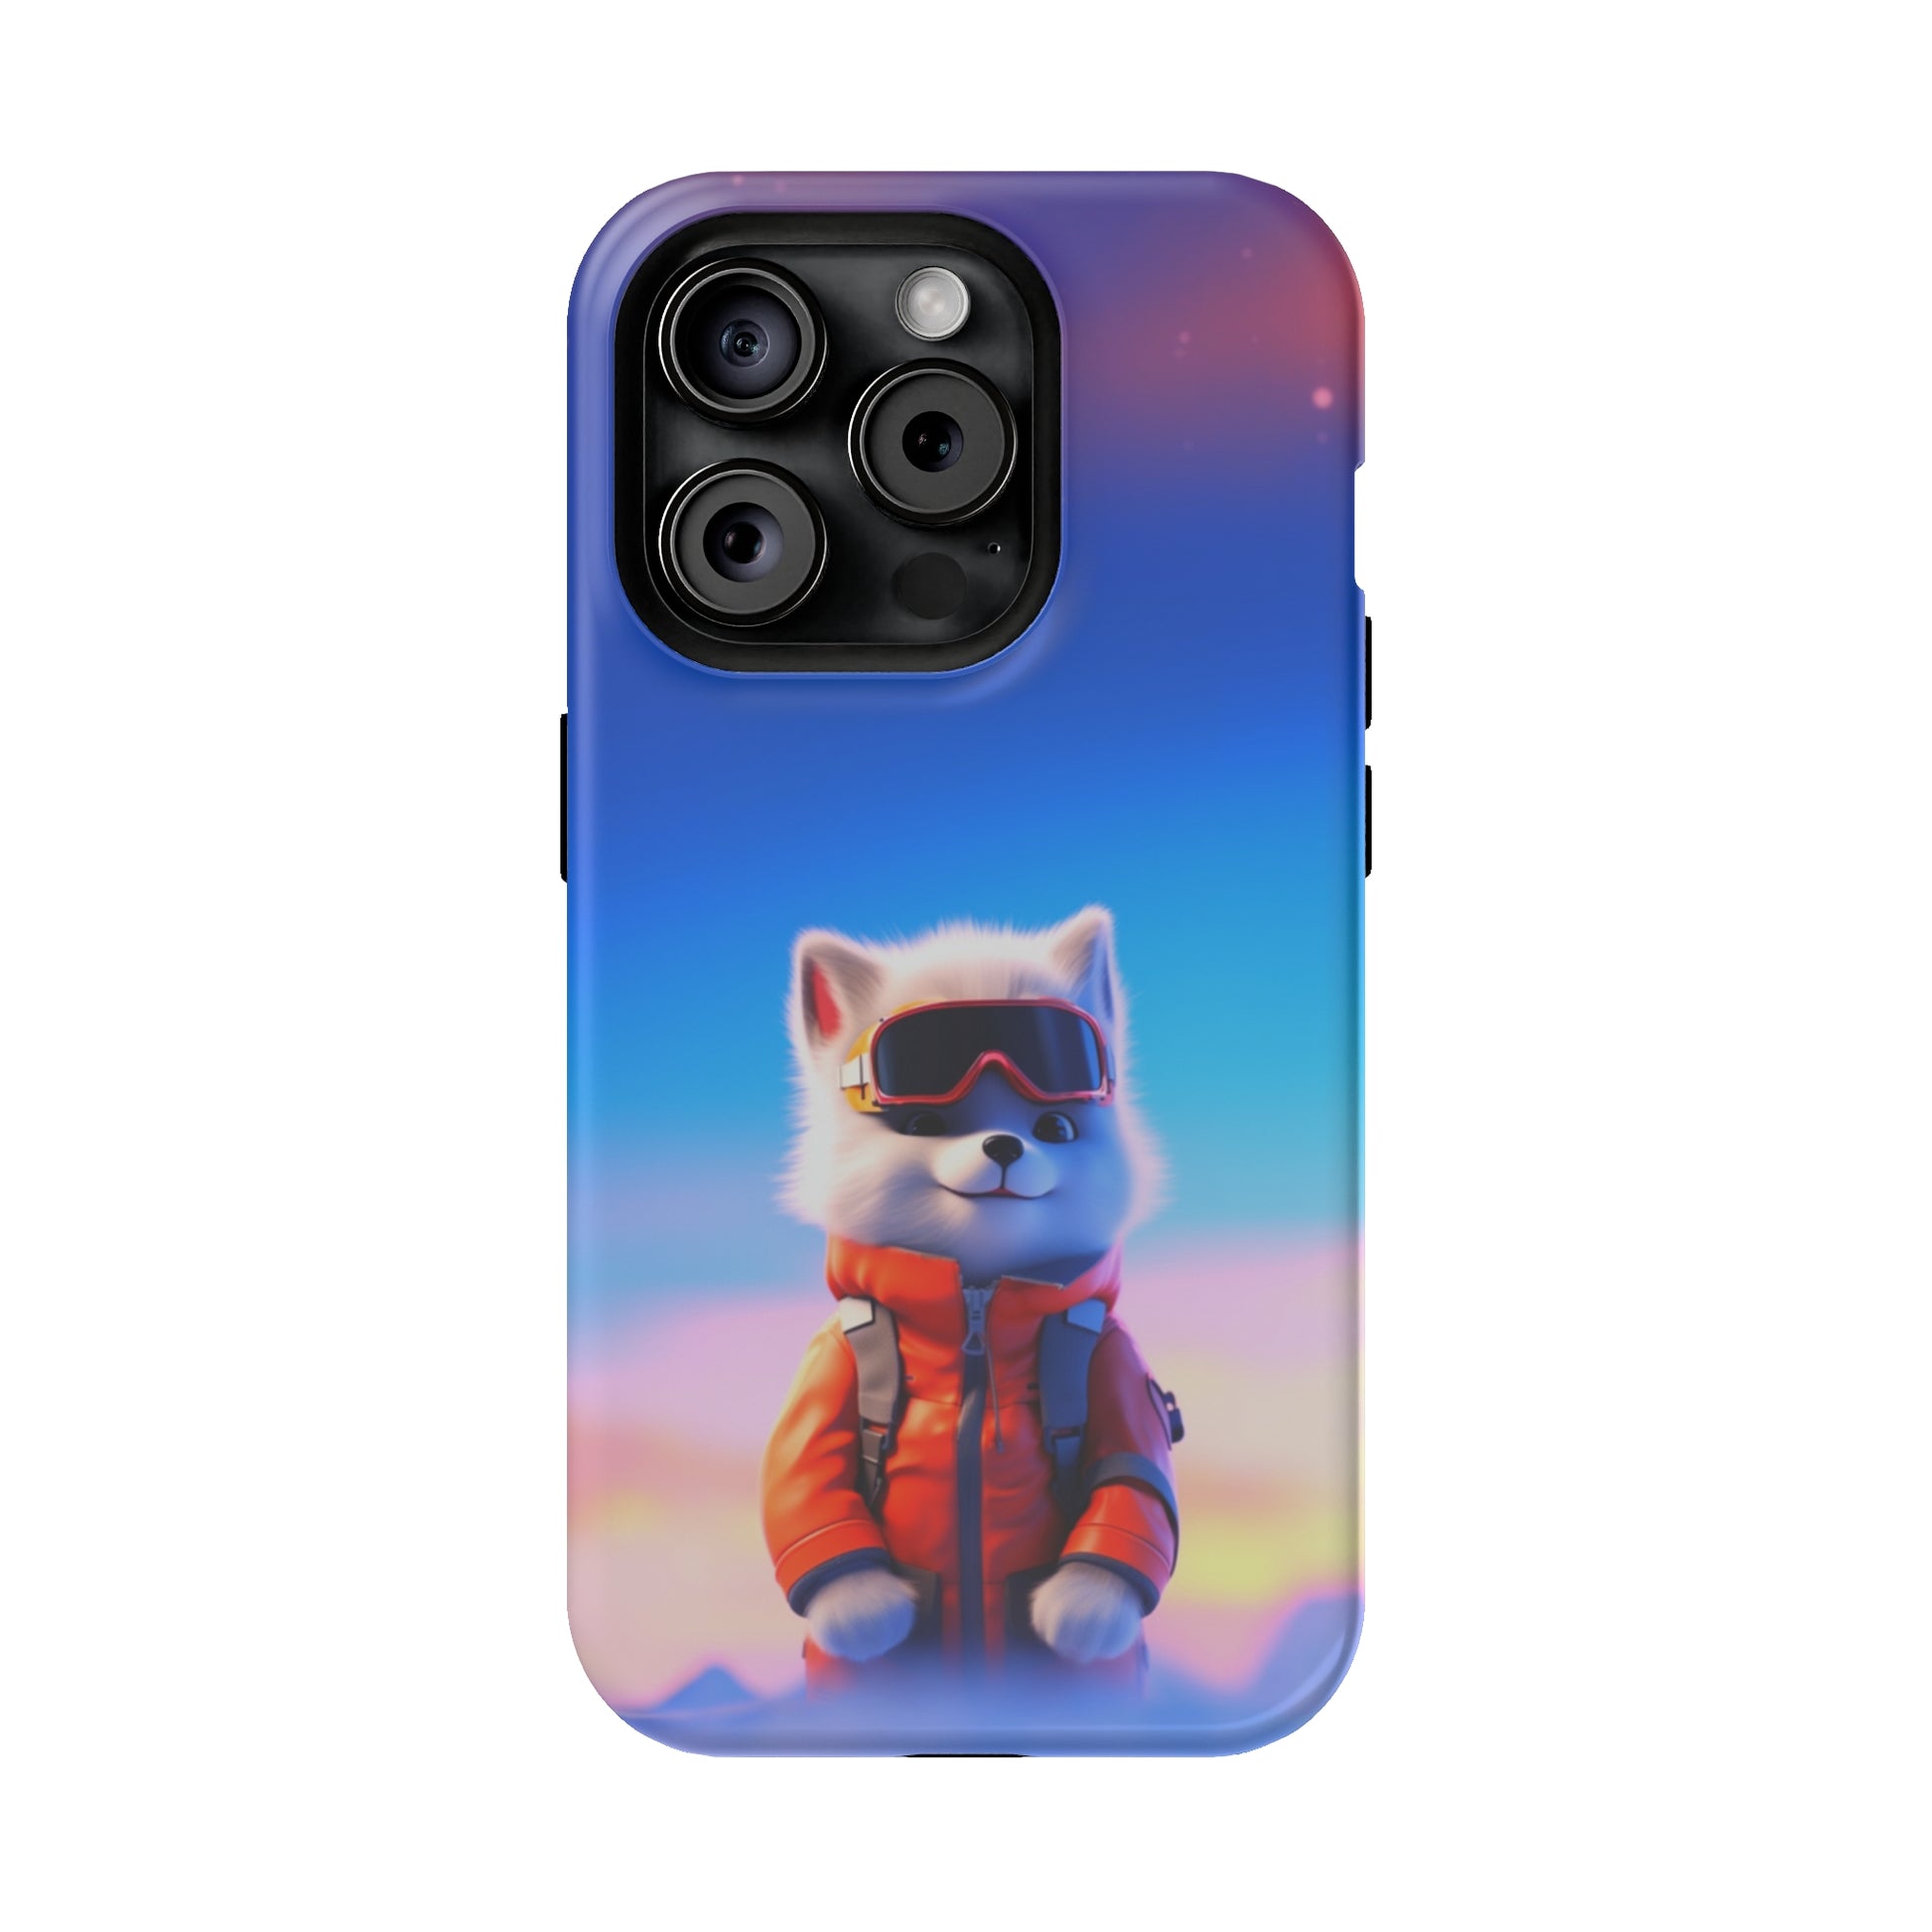 Ski Patrol Pup (iPhone MagSafe Case)Ski Patrol Pup Husky MagSafe Durable Case: Style Meets Protection 📱✨
Upgrade your device with Rima Gallery's Ski Patrol Pup MagSafe Durable Case. This case isn’t juRimaGallery